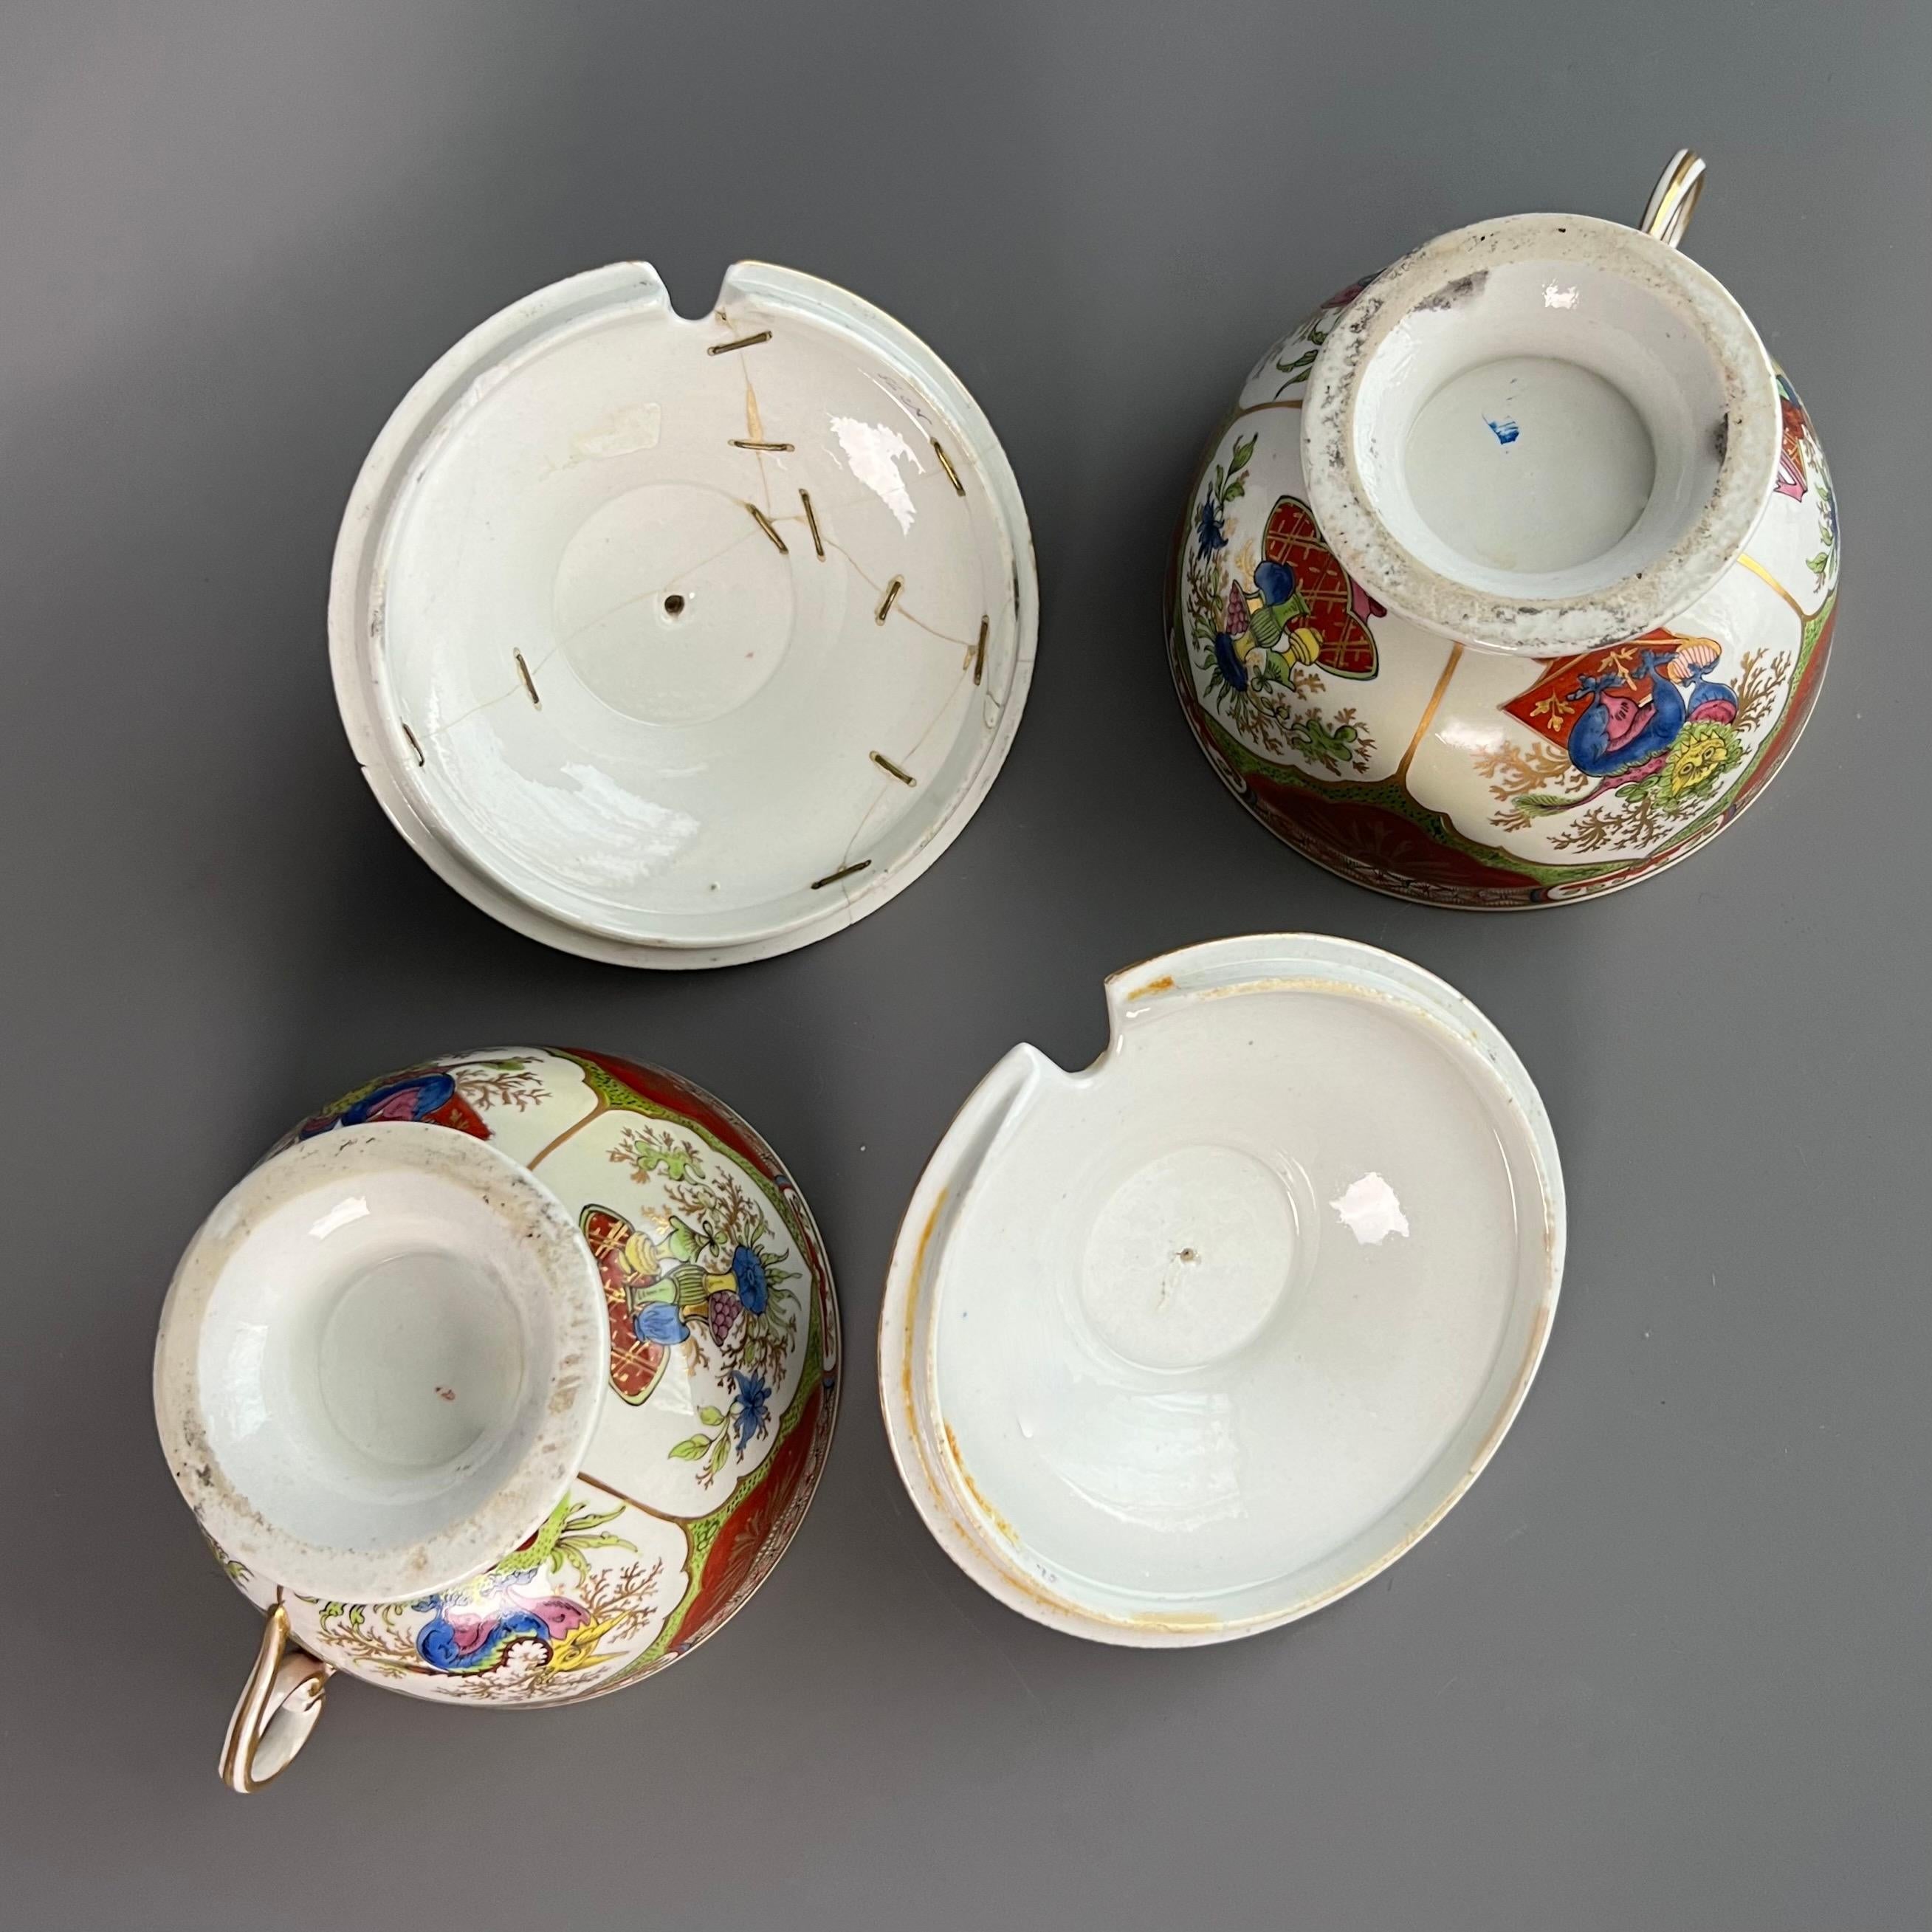 Chamberlain's Worcester Dessert Service Kylin / Dragons in Compartments, ca 1795 7